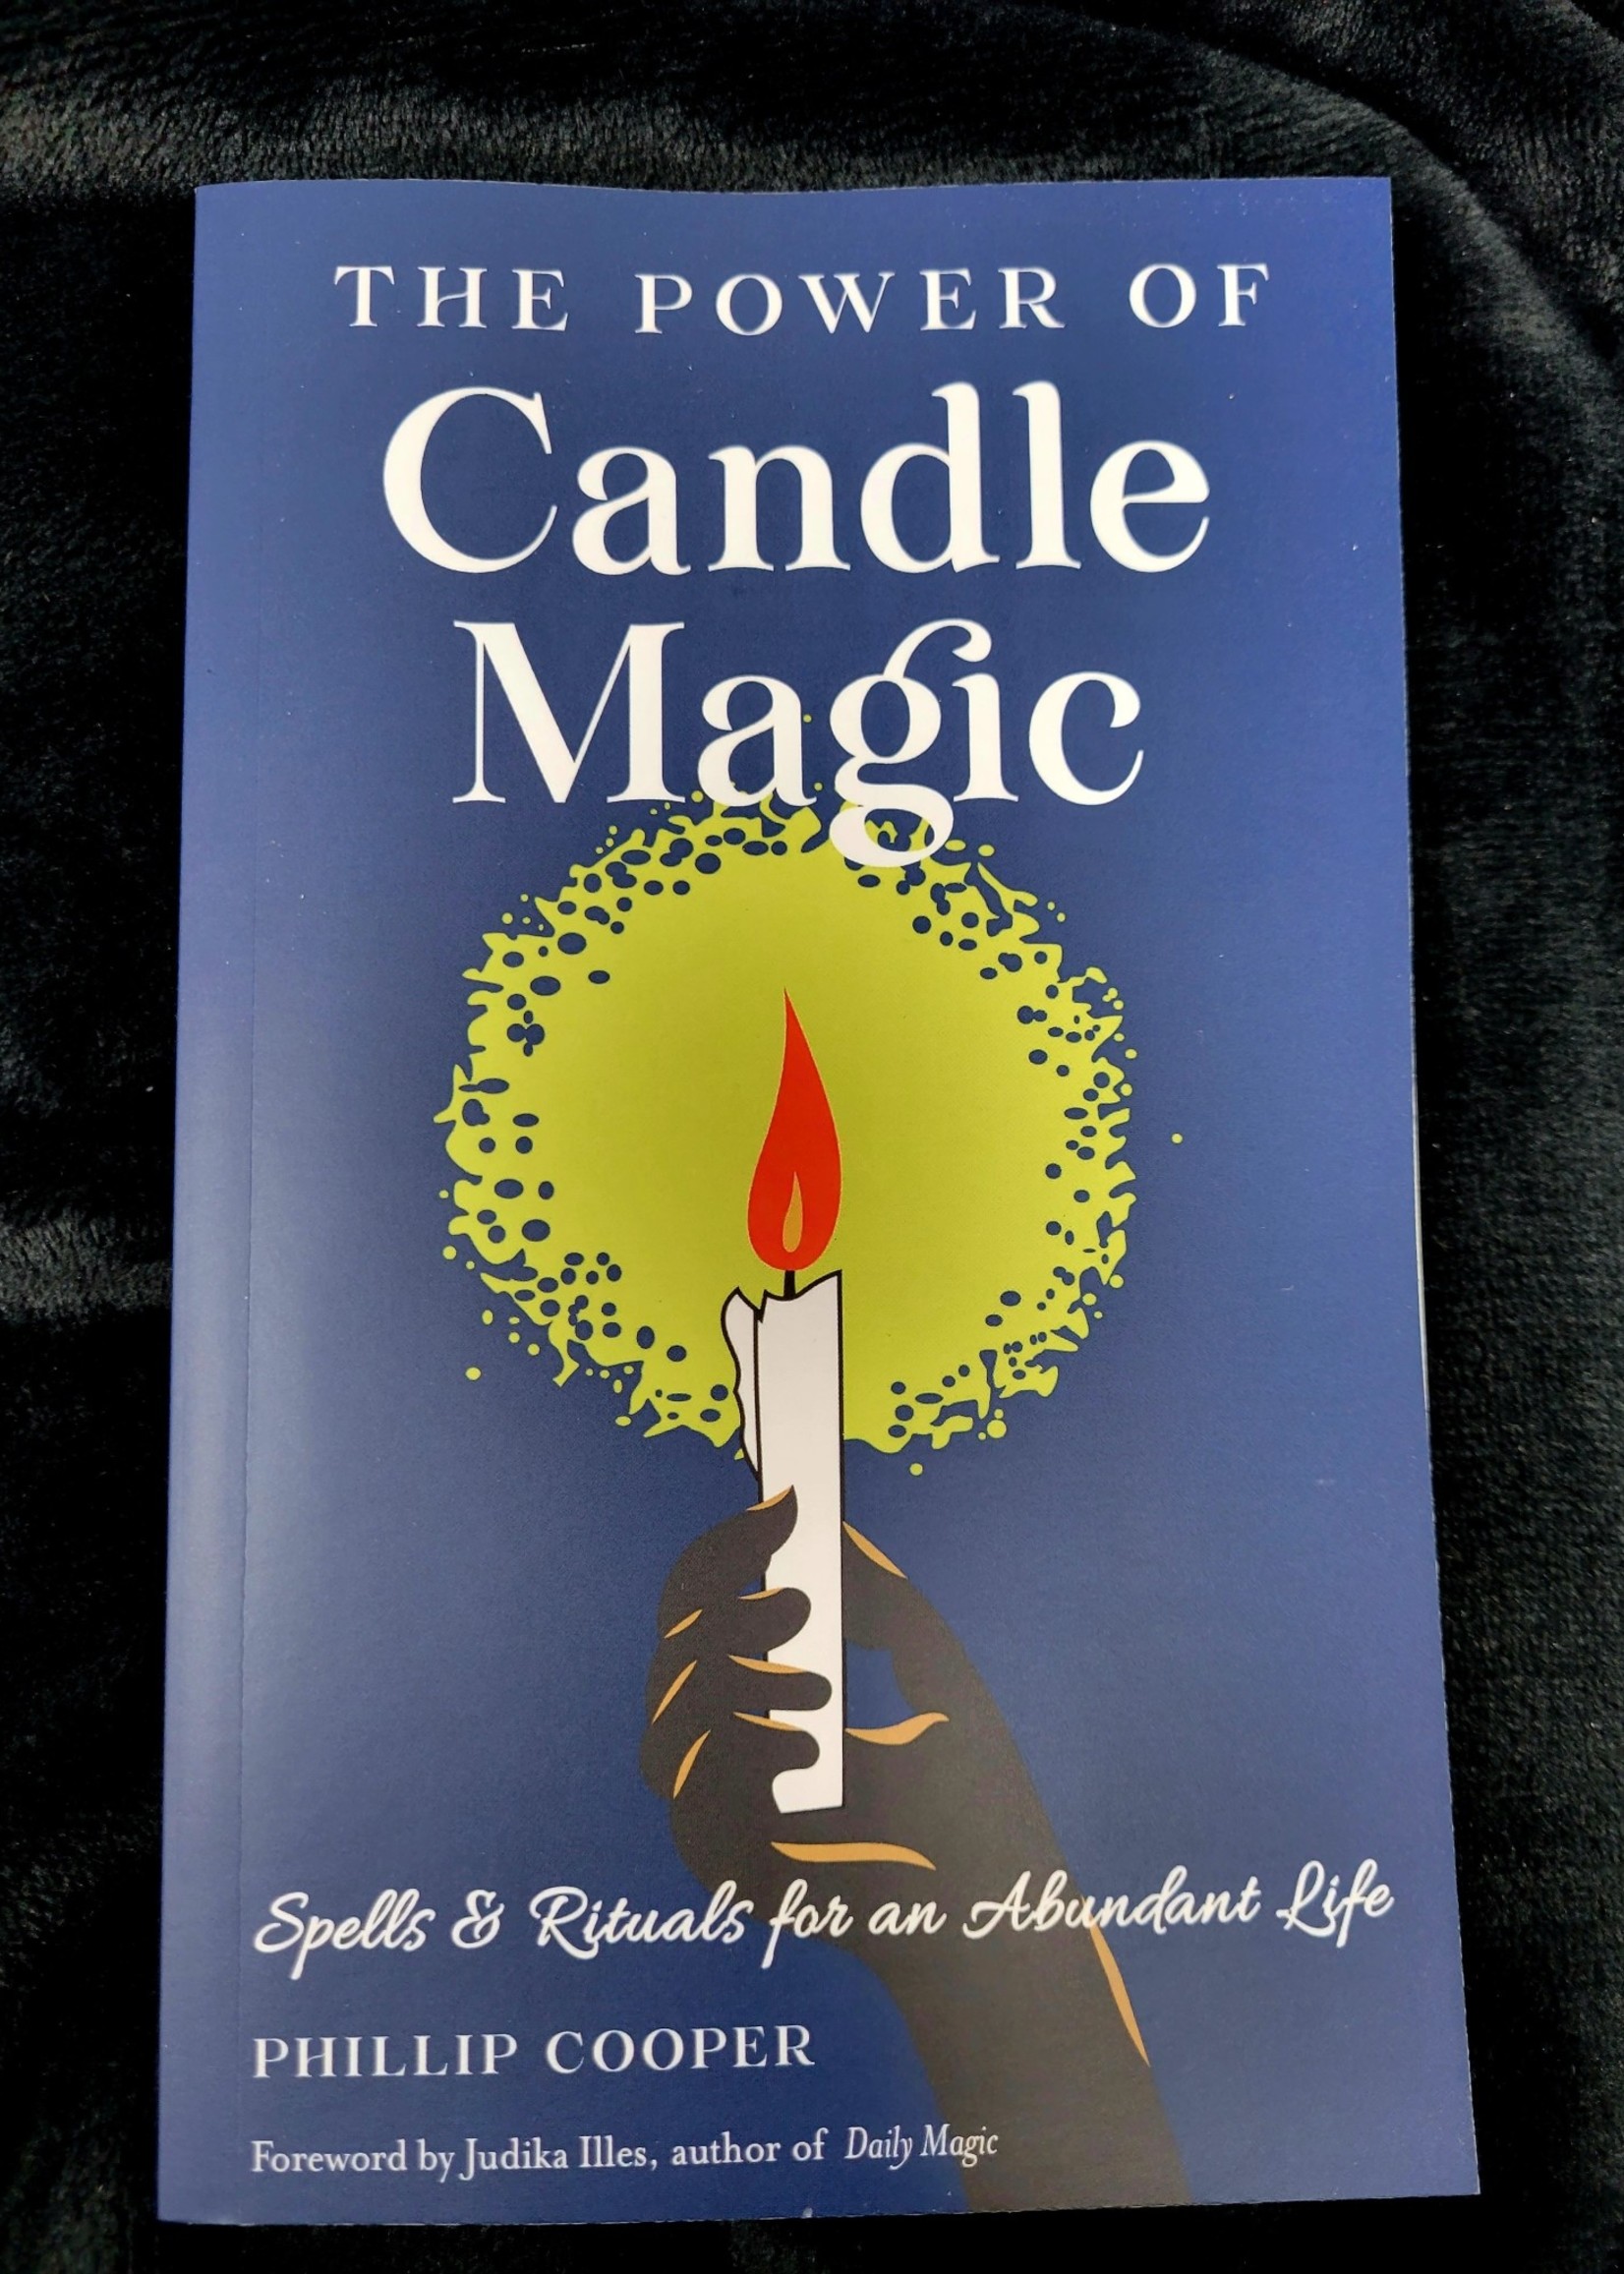 The Power of Candle Magic Spells and Rituals for an Abundant Life - Phillip Cooper